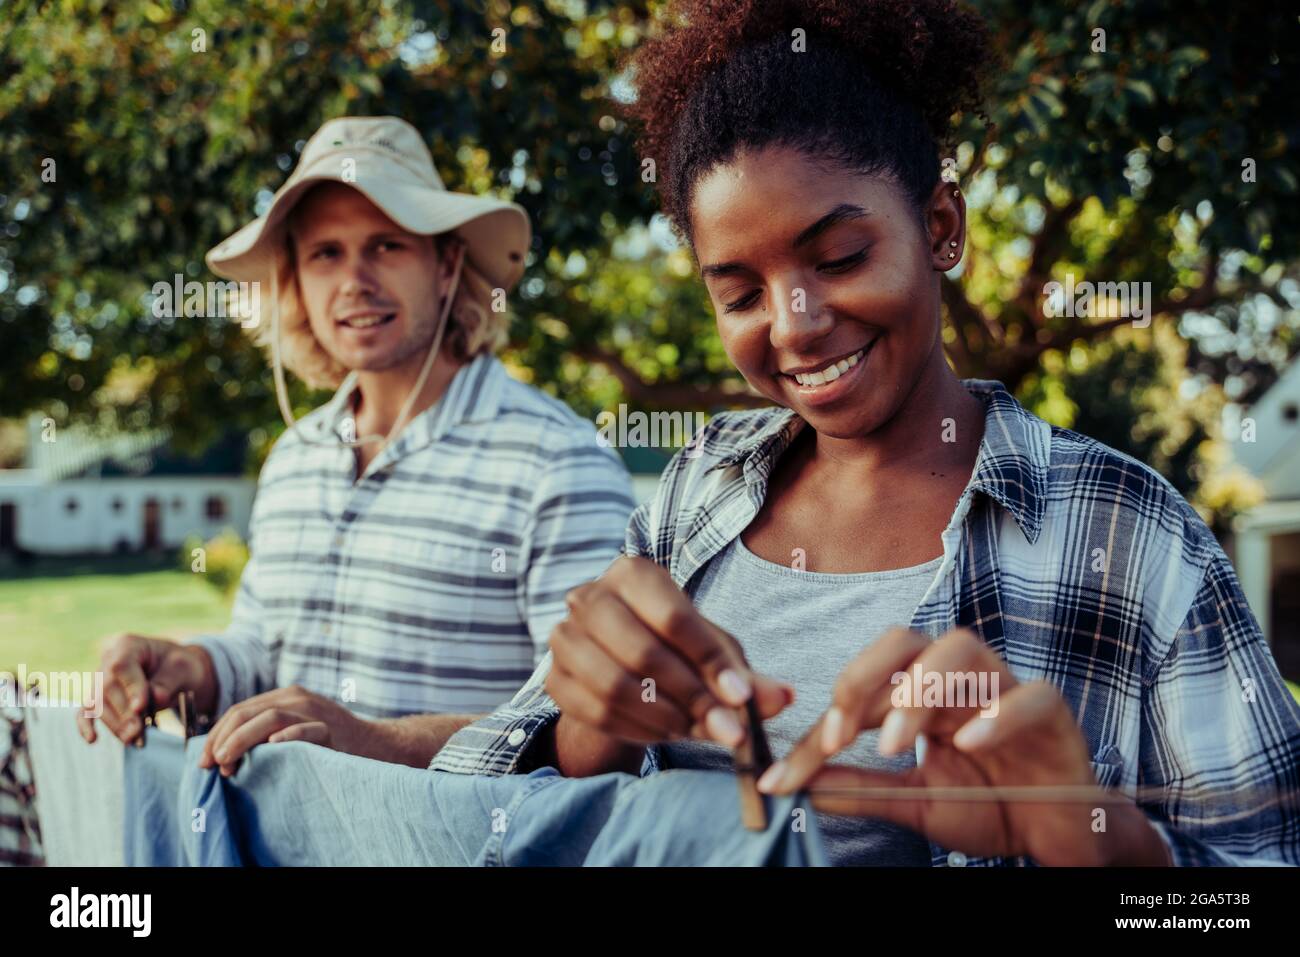 Mixed race female smiling while hanging up clean laundry with caucasian male friend in backyard Stock Photo